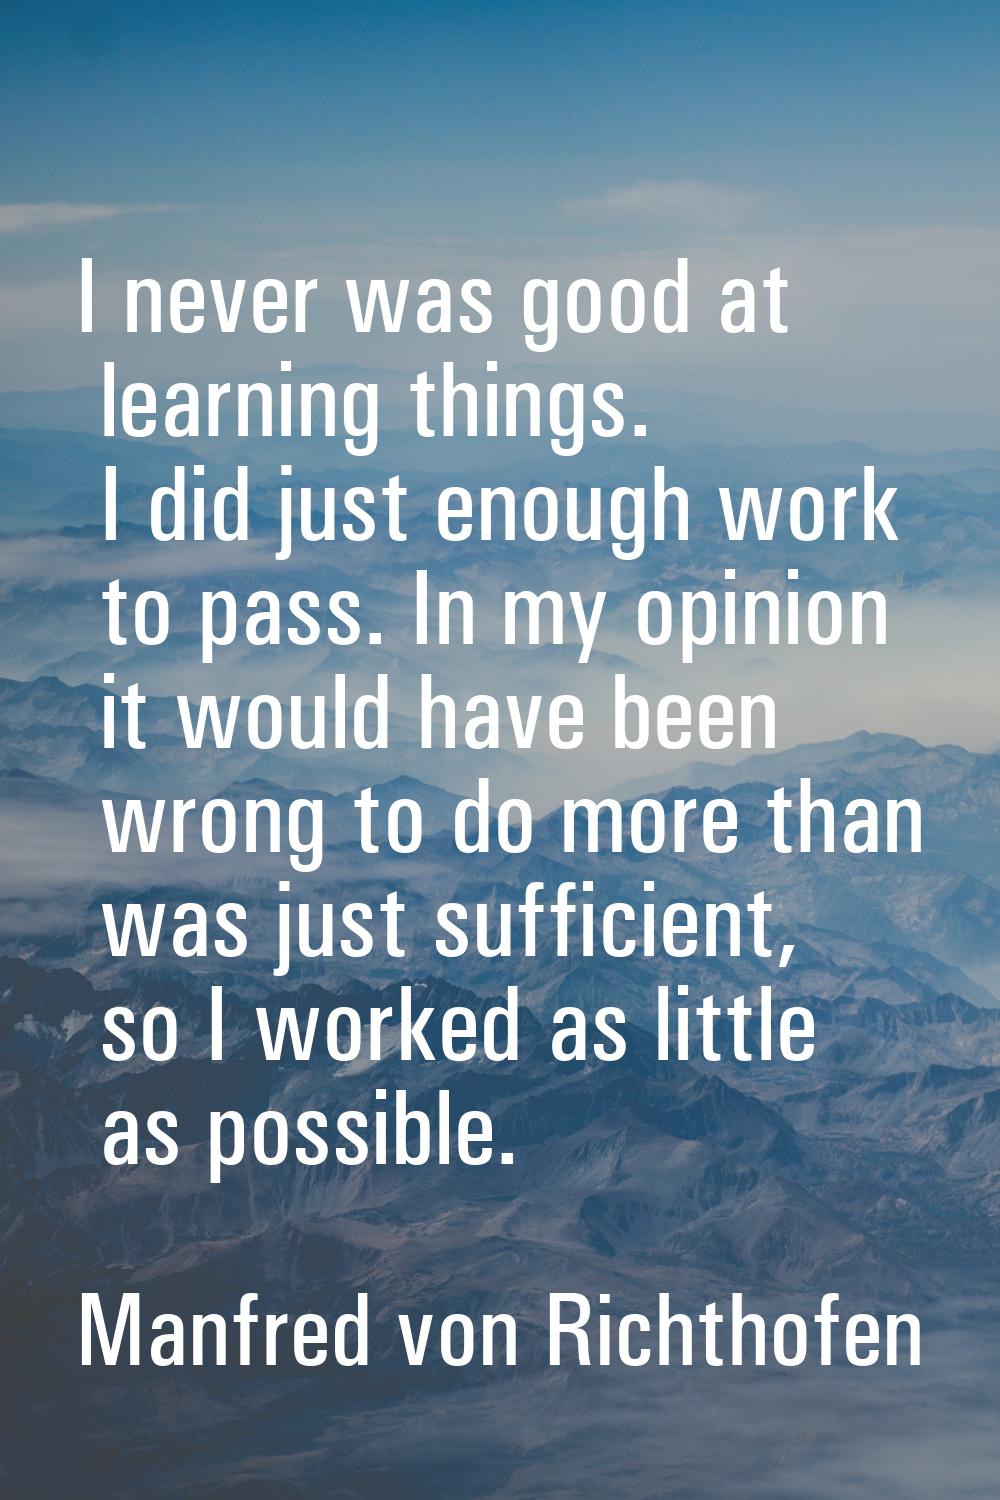 I never was good at learning things. I did just enough work to pass. In my opinion it would have be